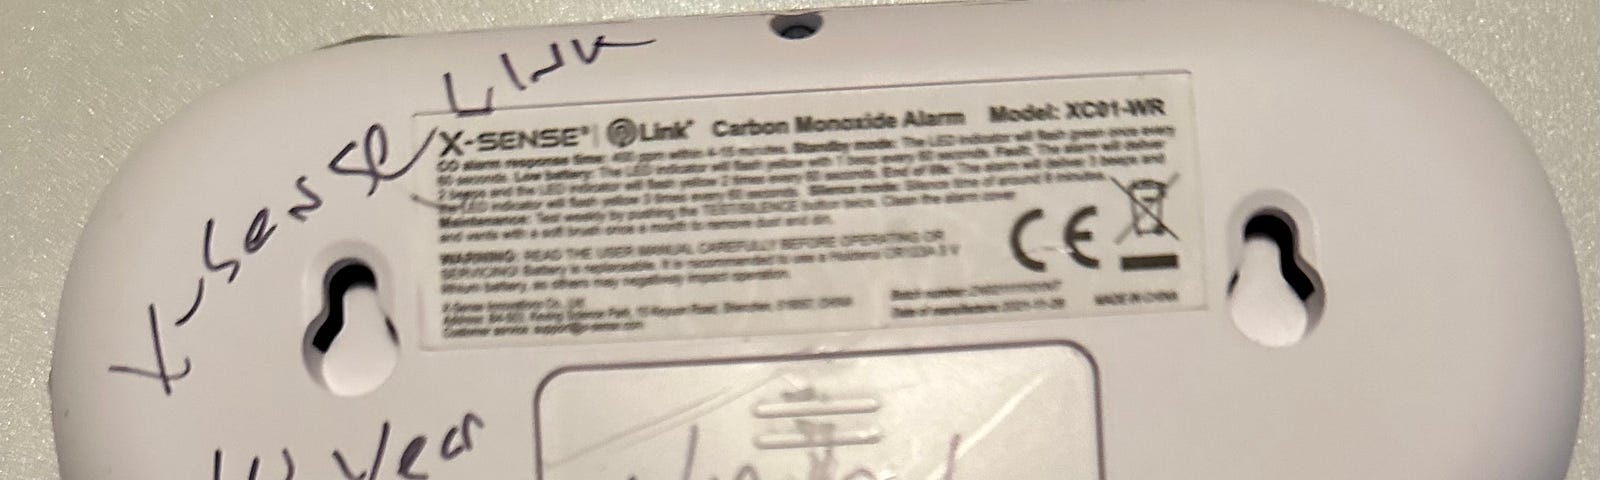 The image shows the back of a carbon monoxide alarm, specifically the X-Sense model XC01-WR. There is handwriting on the alarm that seems to indicate a lifespan or replacement schedule for the device, marked as “10 years”, with a date written below, “1/13/21”, which could possibly be the installation date or the date when the alarm was last checked. The presence of CE marking indicates that the product is compliant with European Economic Area standards for health, safety, and environmental prote